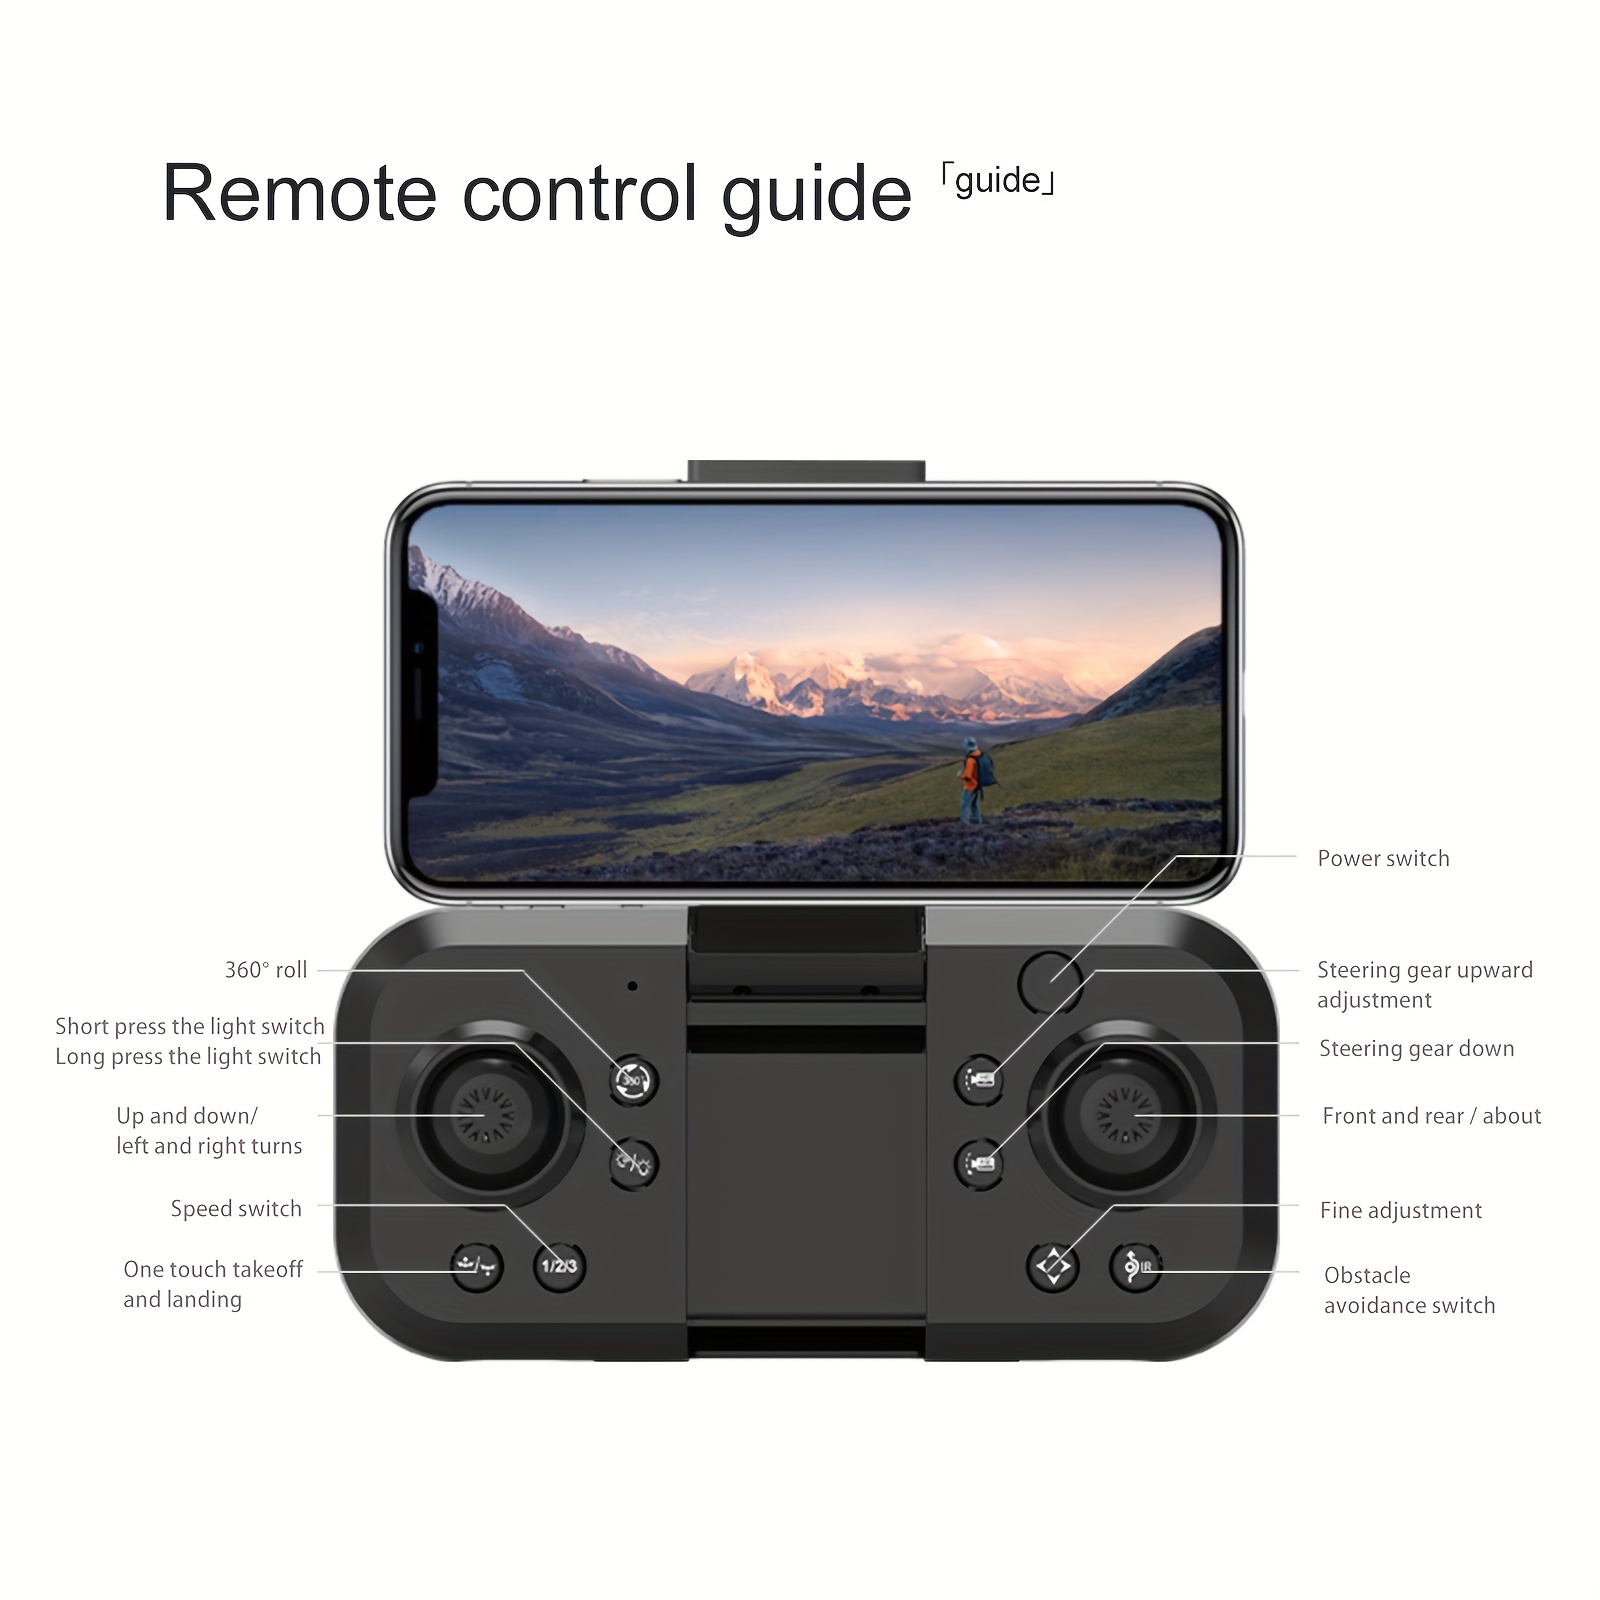 yt163 foldable drone remote control and app control easy to carry four sided sensor obstacle avoidance stable flight one key return high definition camera camera angle adjustable drone details 21